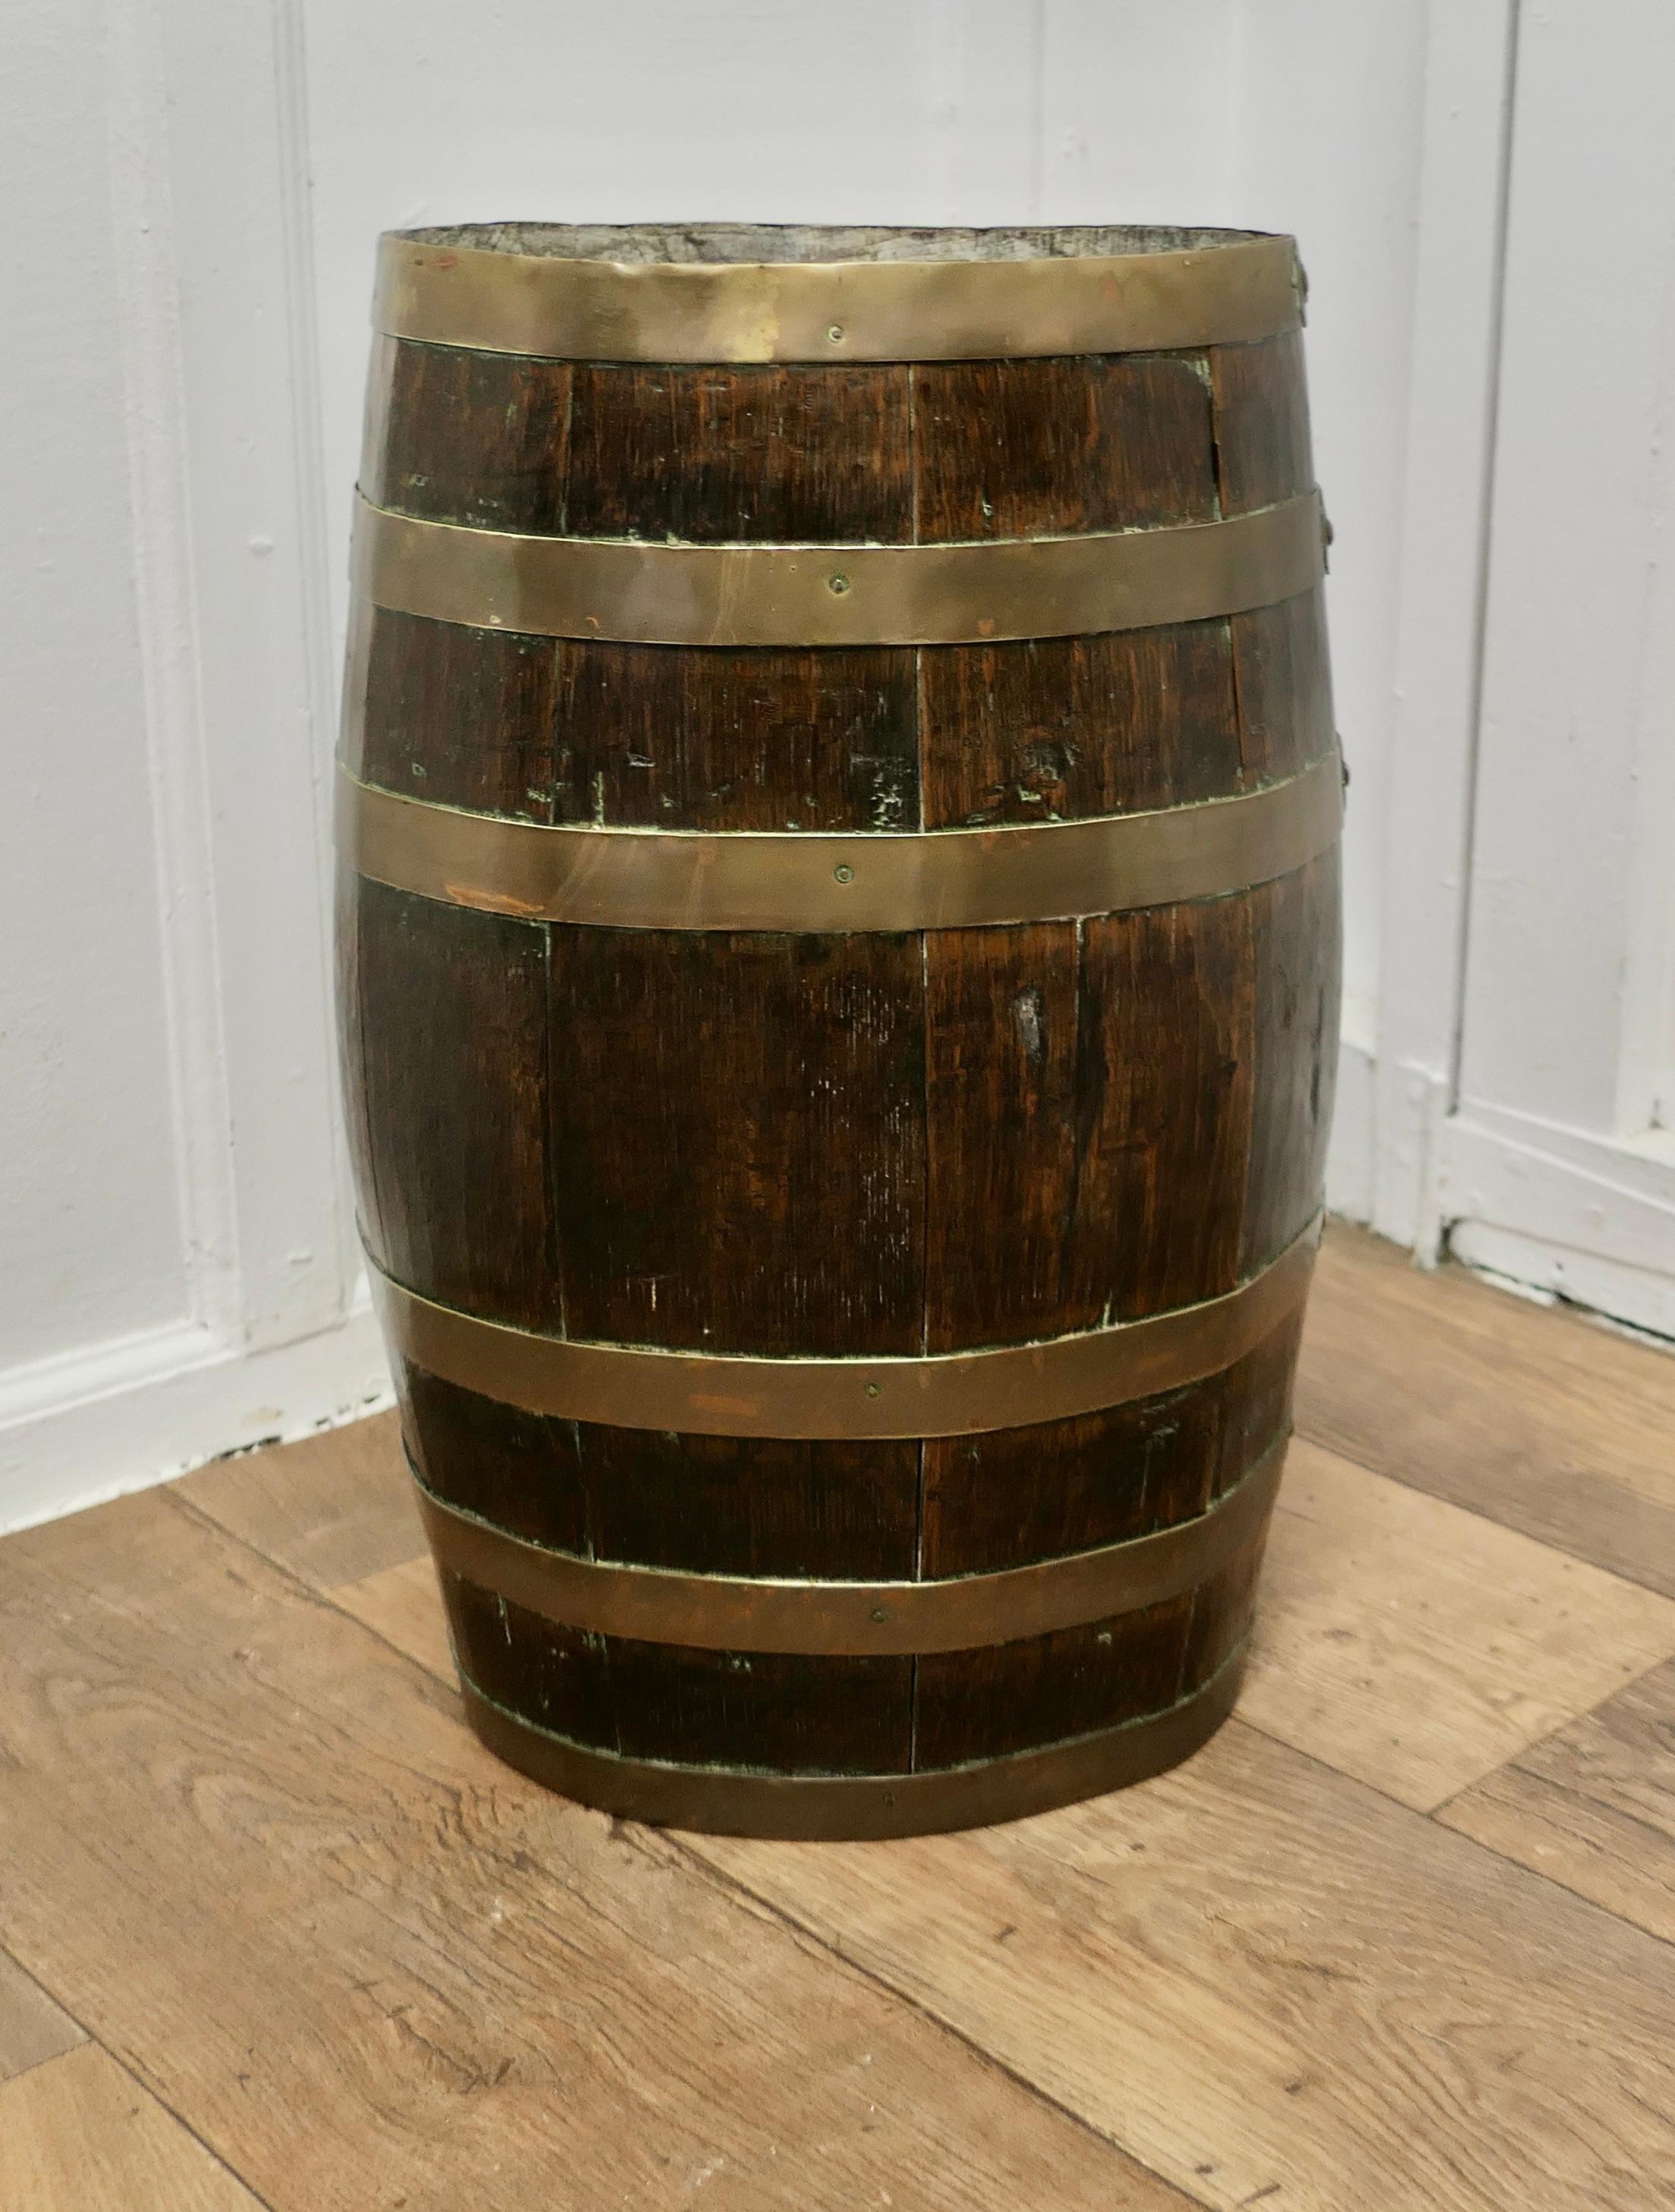 A Large Brass and Oak Barrel Stick Stand

This  good looking piece originated as a 19th Century Rum Barrel, it is made with oak staves and bound with 6 wide brass hoops

The Barrel is in good attractive condition, it is 22” high and 14”  x 11” oval